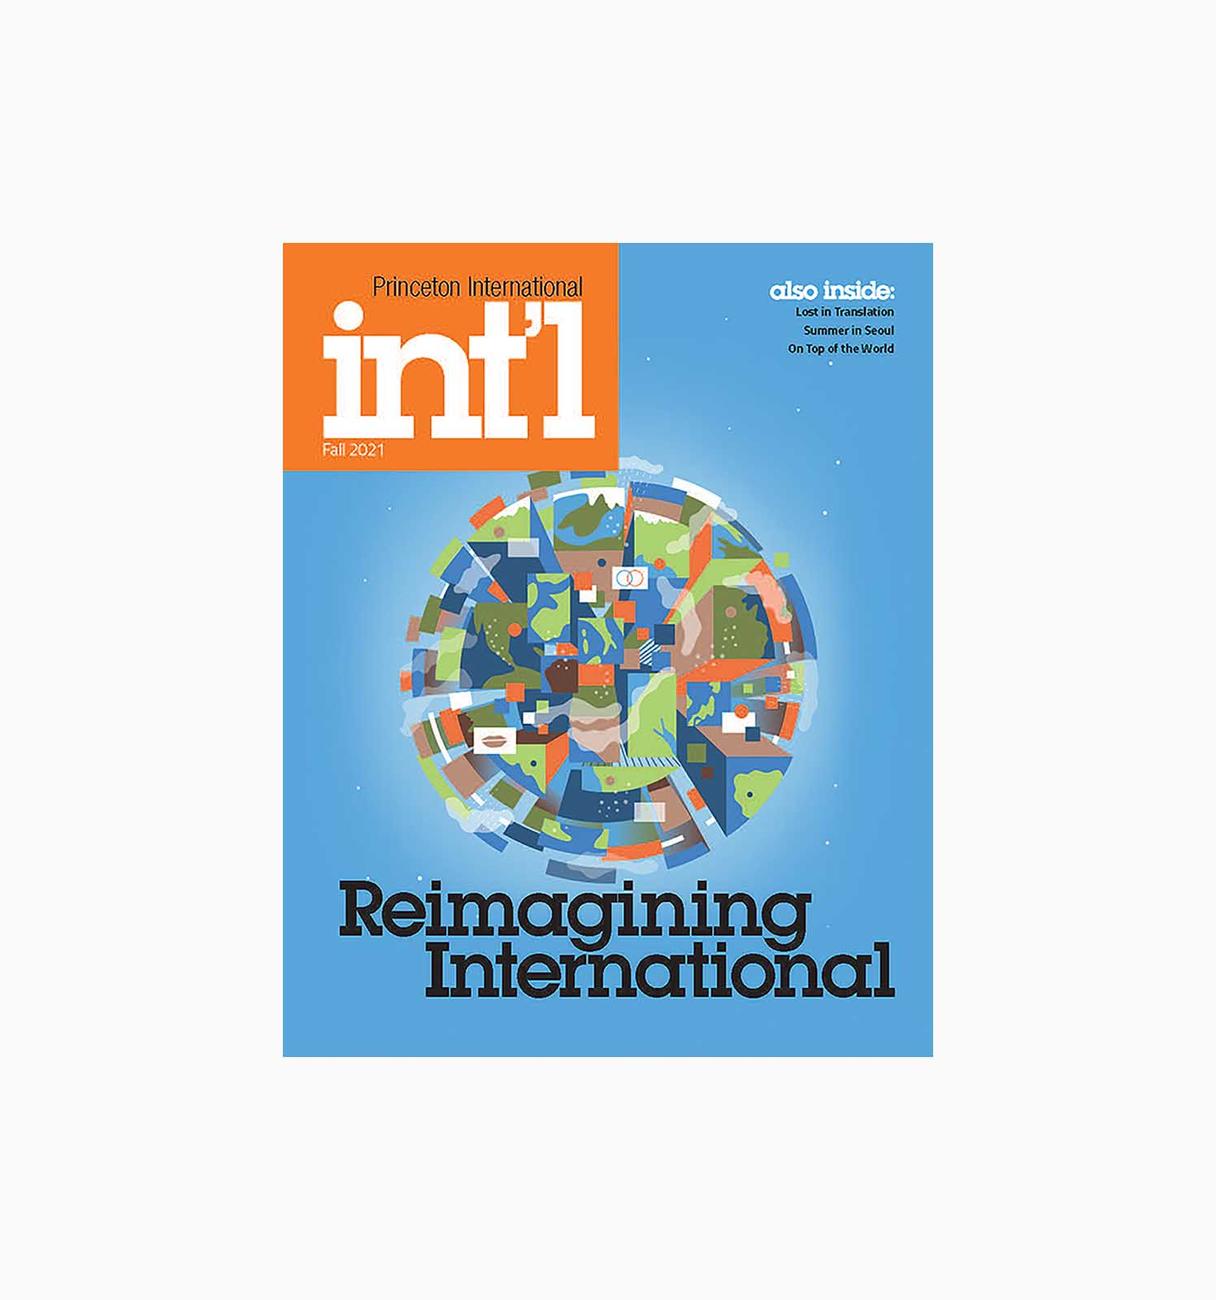 Princeton Intl Magazine cover from 2021 with an abstract depiction of a globe and a headline reading: Reimagining International